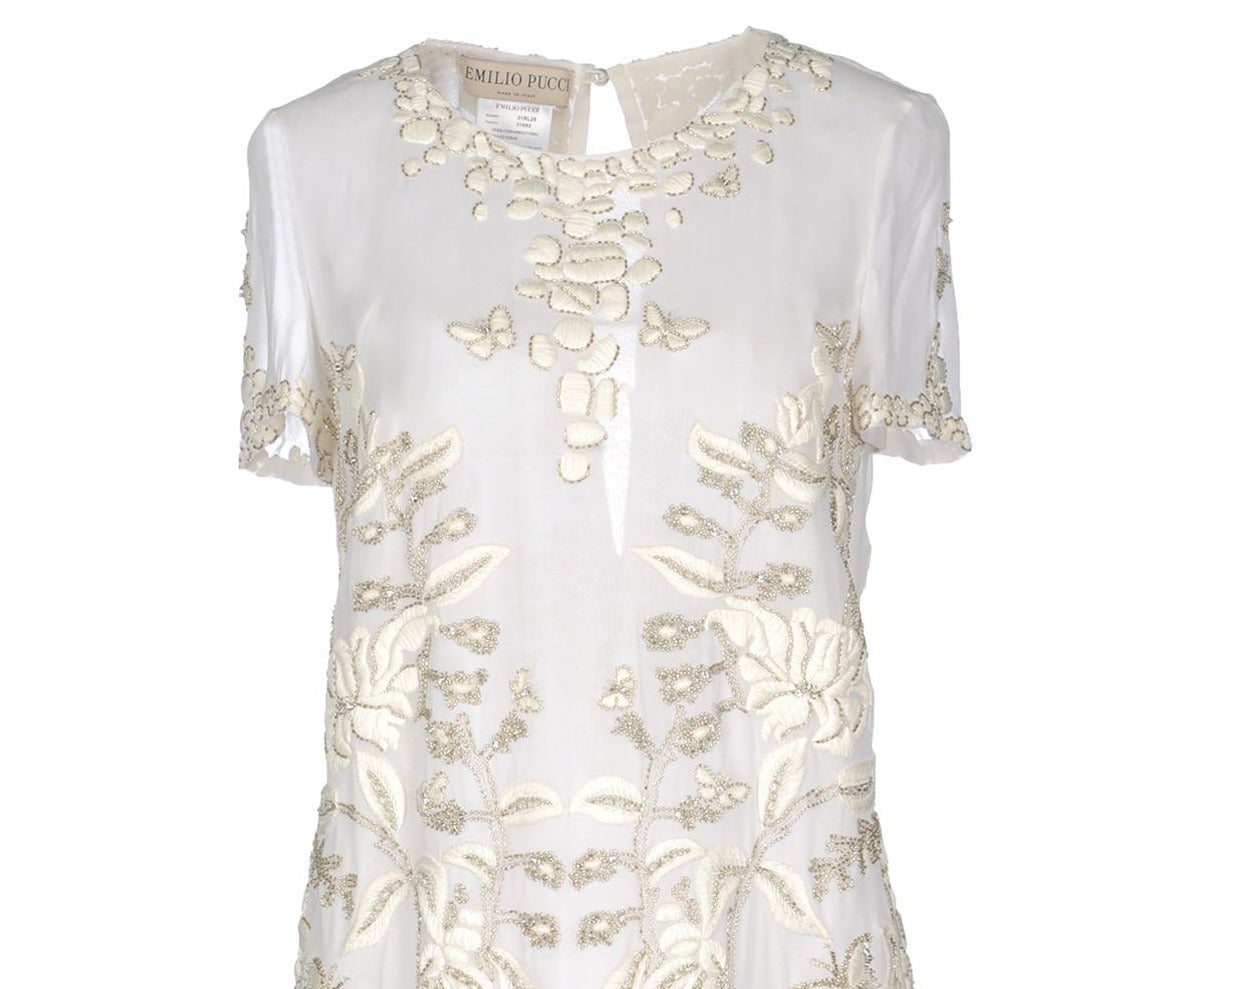 Emilio Pucci Embellished Silk Dress

Embroidery, Beads

100% Silk

Fully lined

IT Size 40

Brand New

Exquisite!